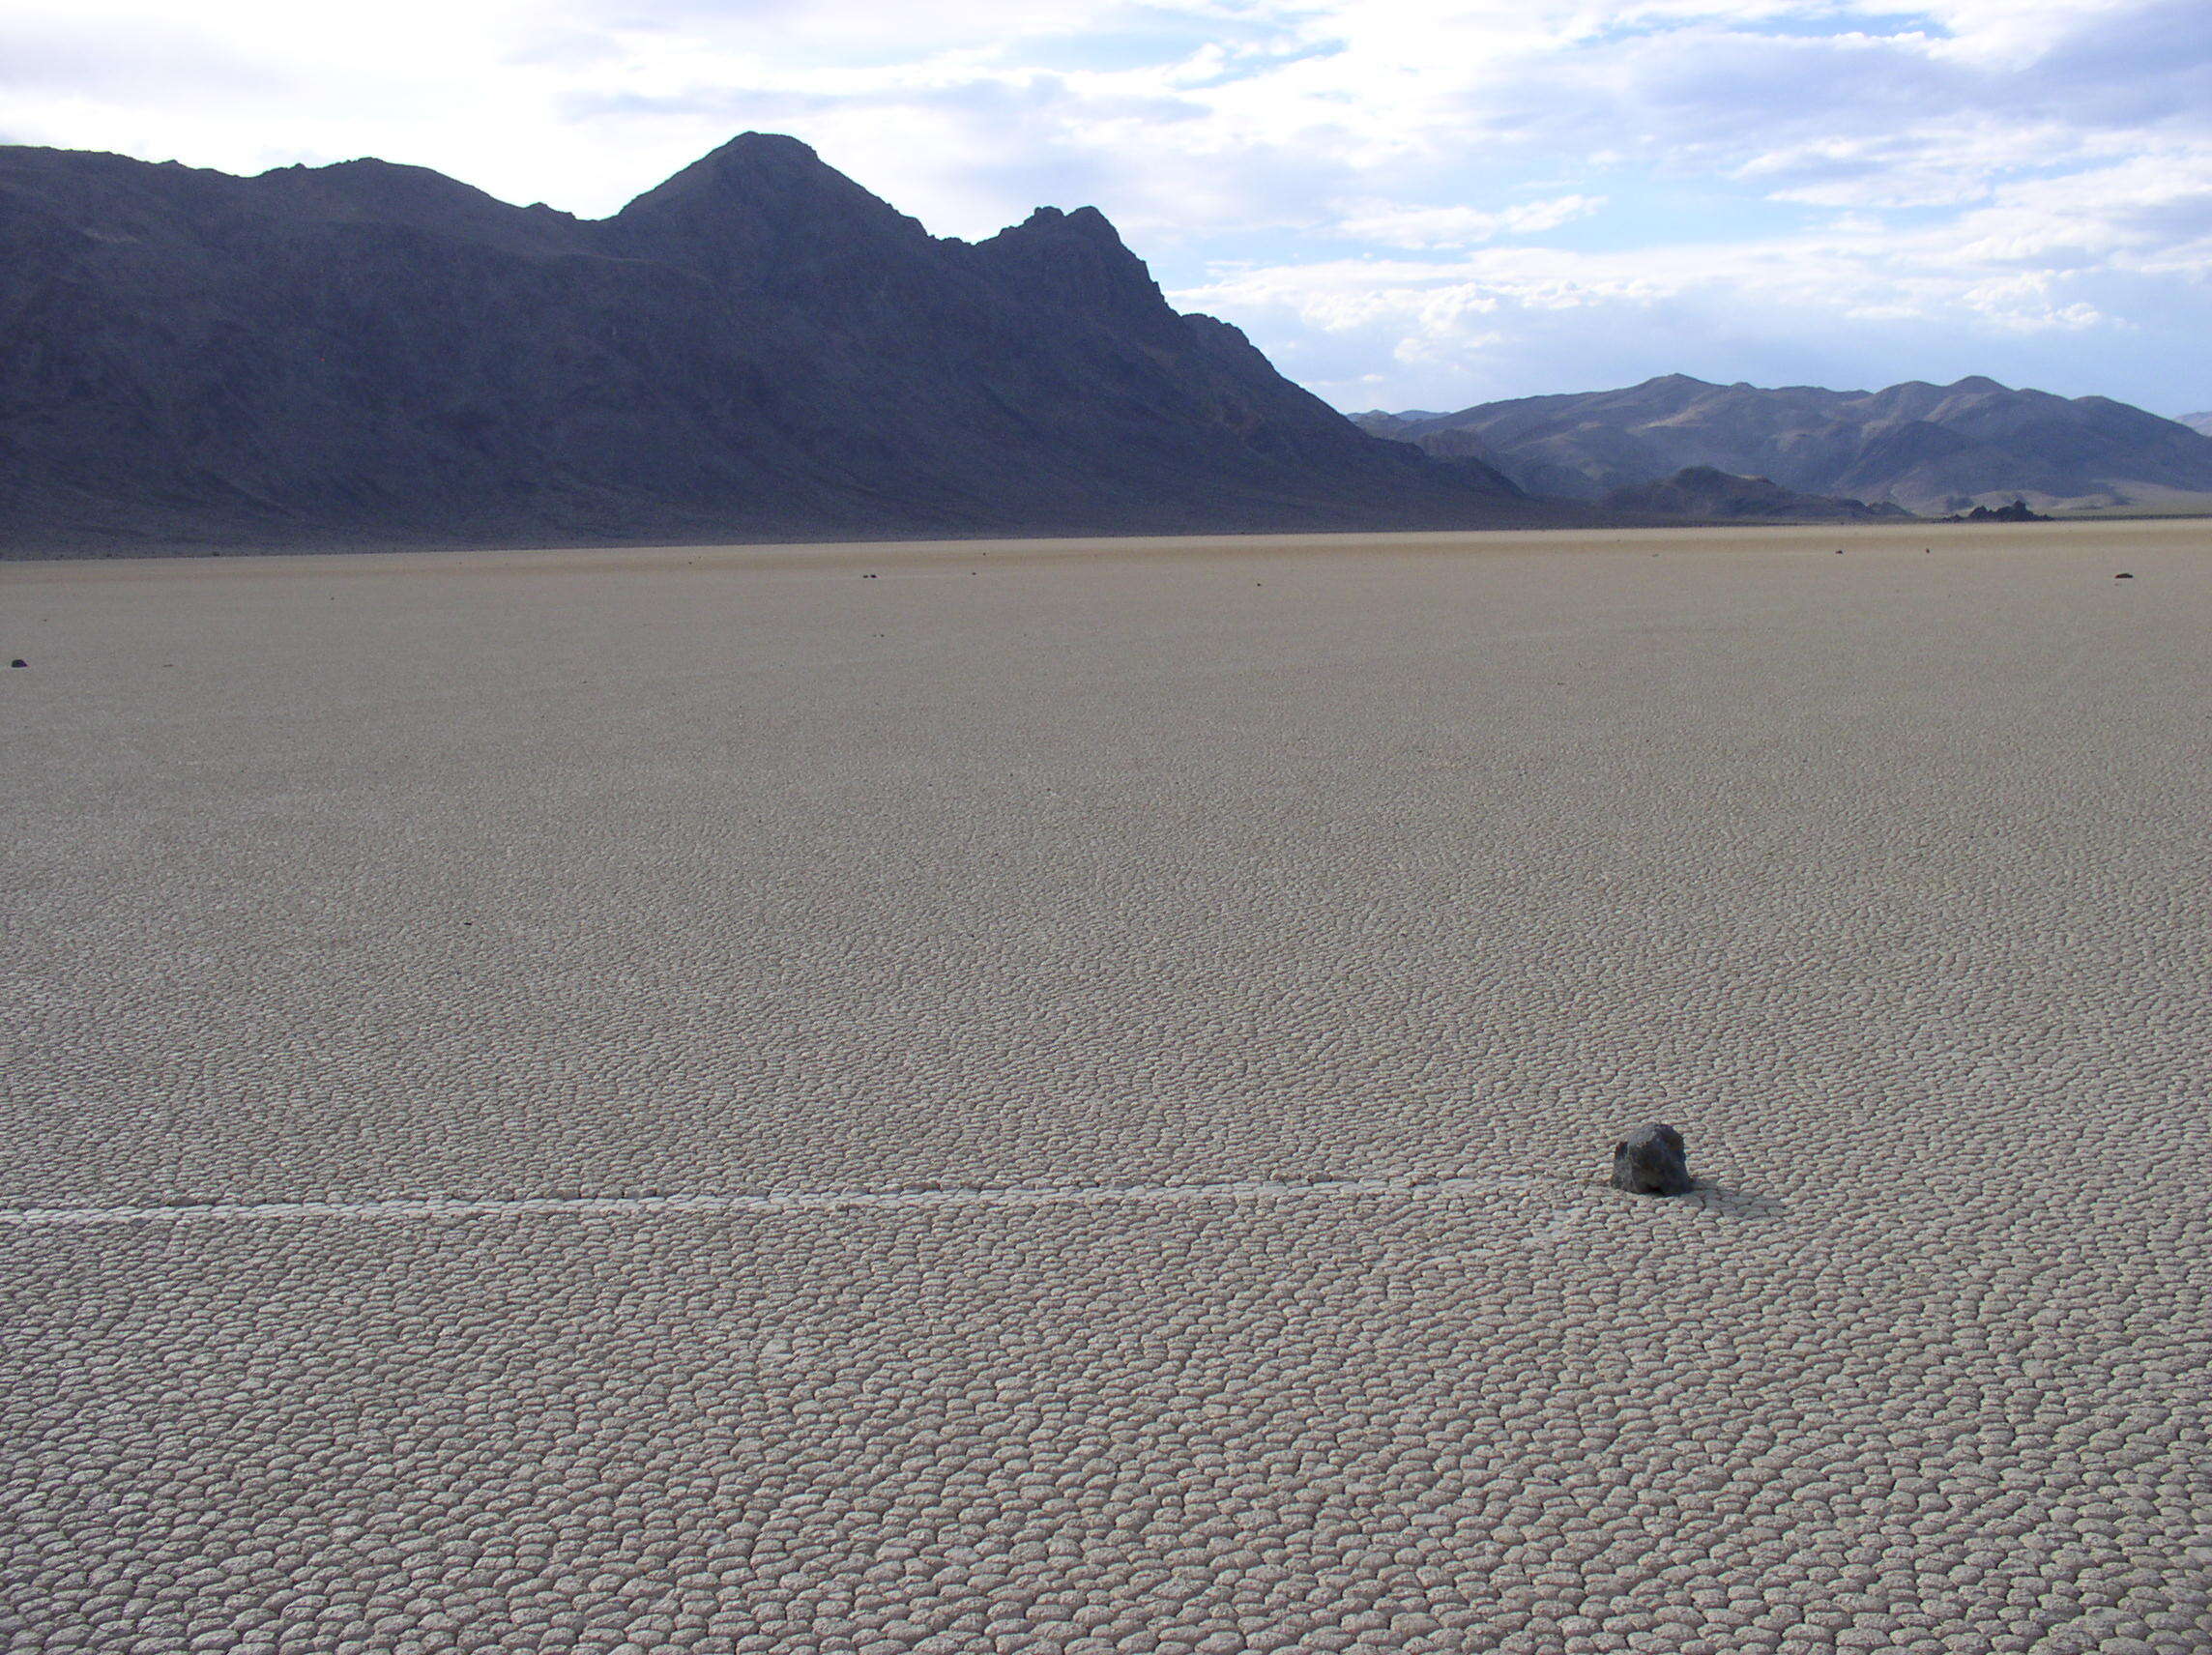 A small rock and a trail of dragged earth behind it on a dry lake bed, with mountains in the distance.